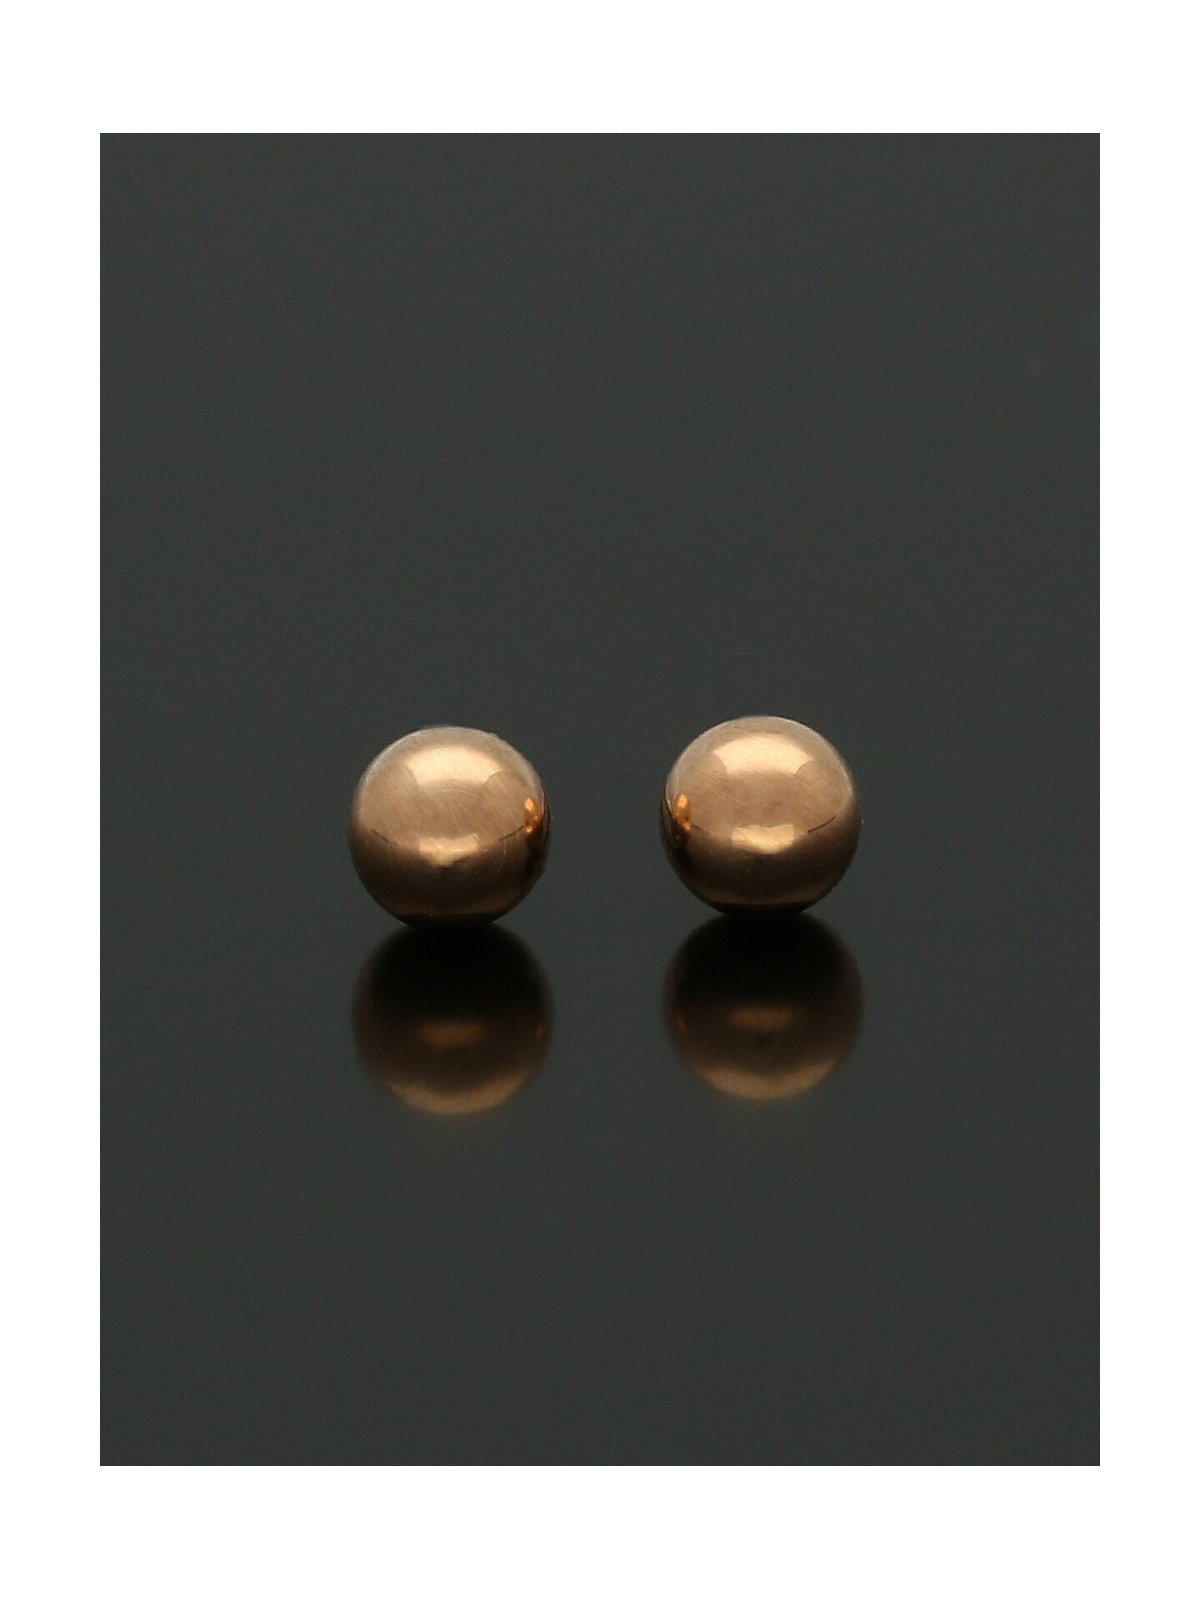 Ball Stud Earrings 4mm in 9ct Rose Gold